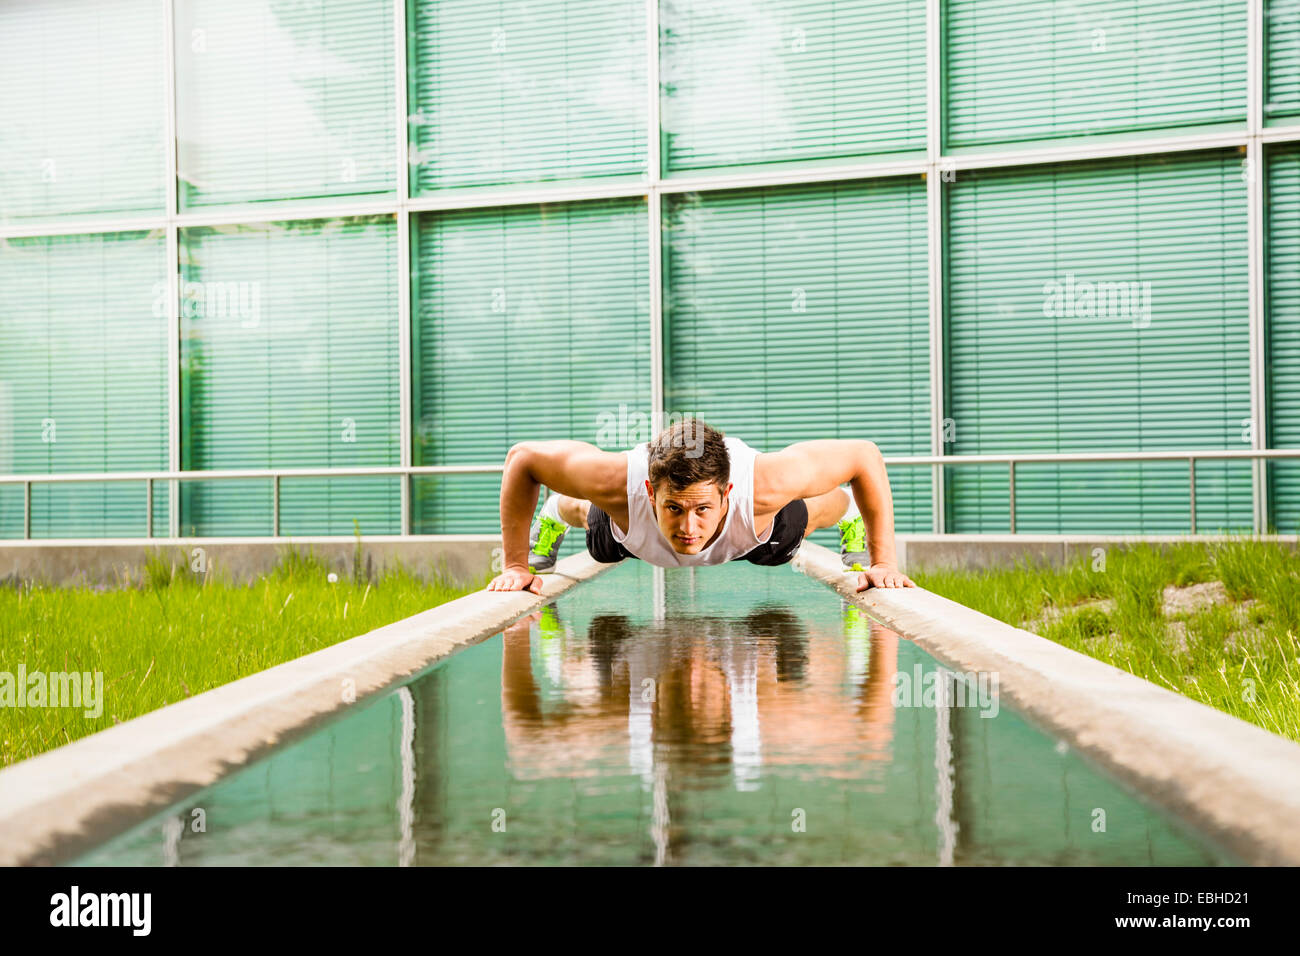 Personal trainer doing outdoor training in urban place, Munich, Bavaria, Germany Stock Photo